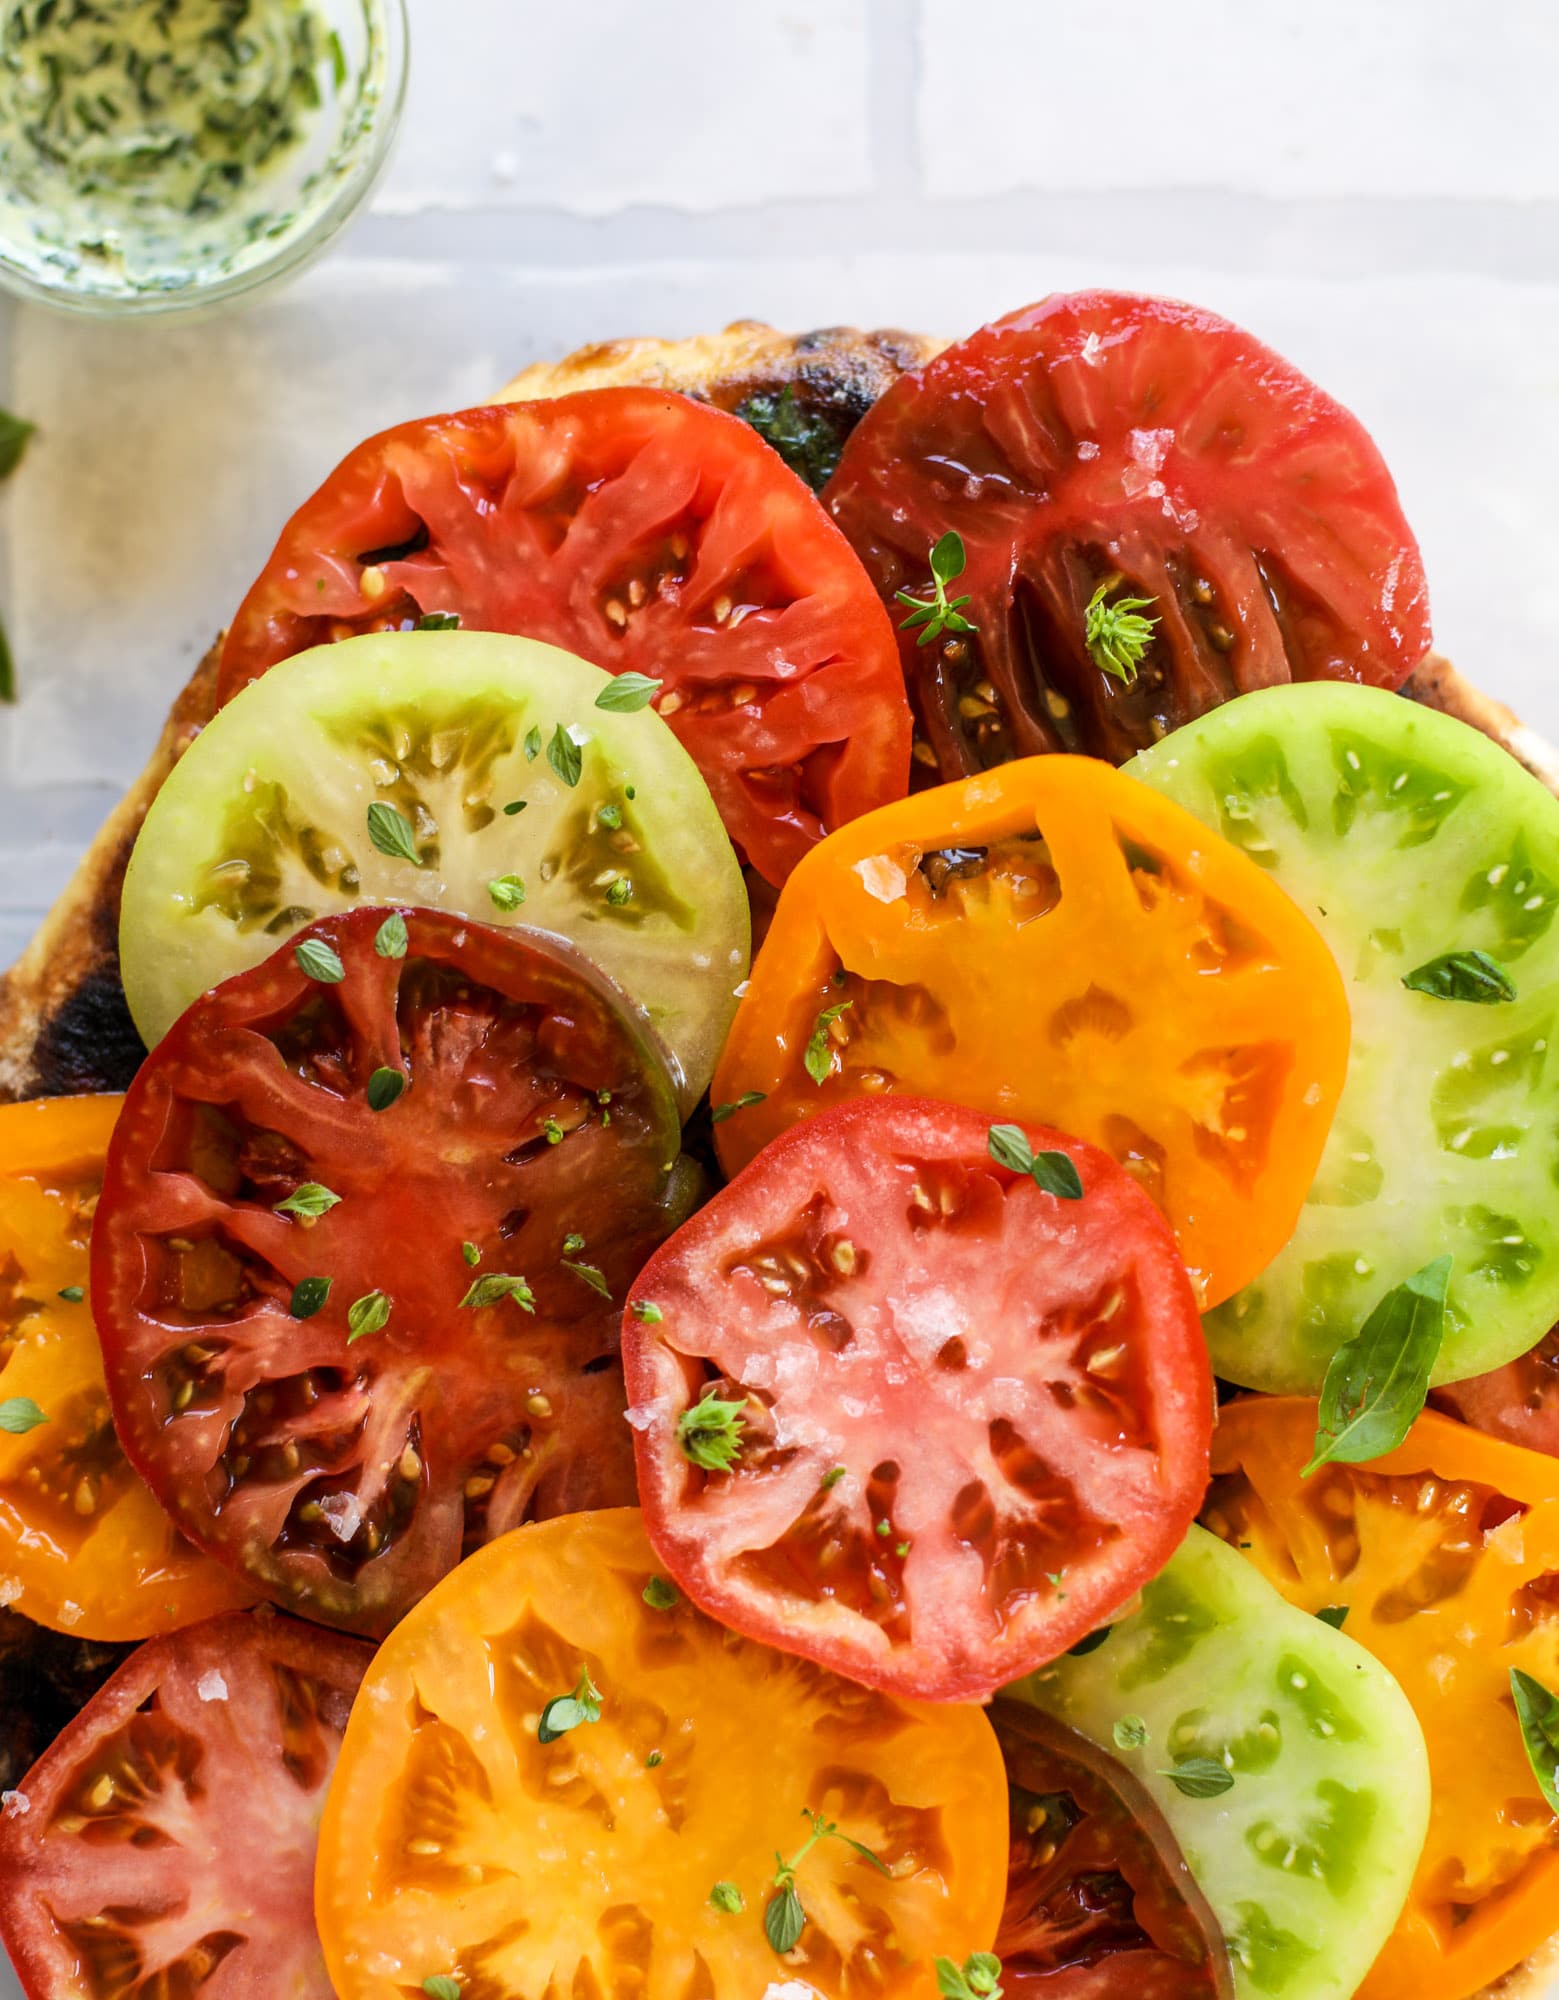 This heirloom tomato pizza starts with a grilled garlic herb butter crust! Melty herb butter and sliced fresh tomatoes top it off for a delicious bite!